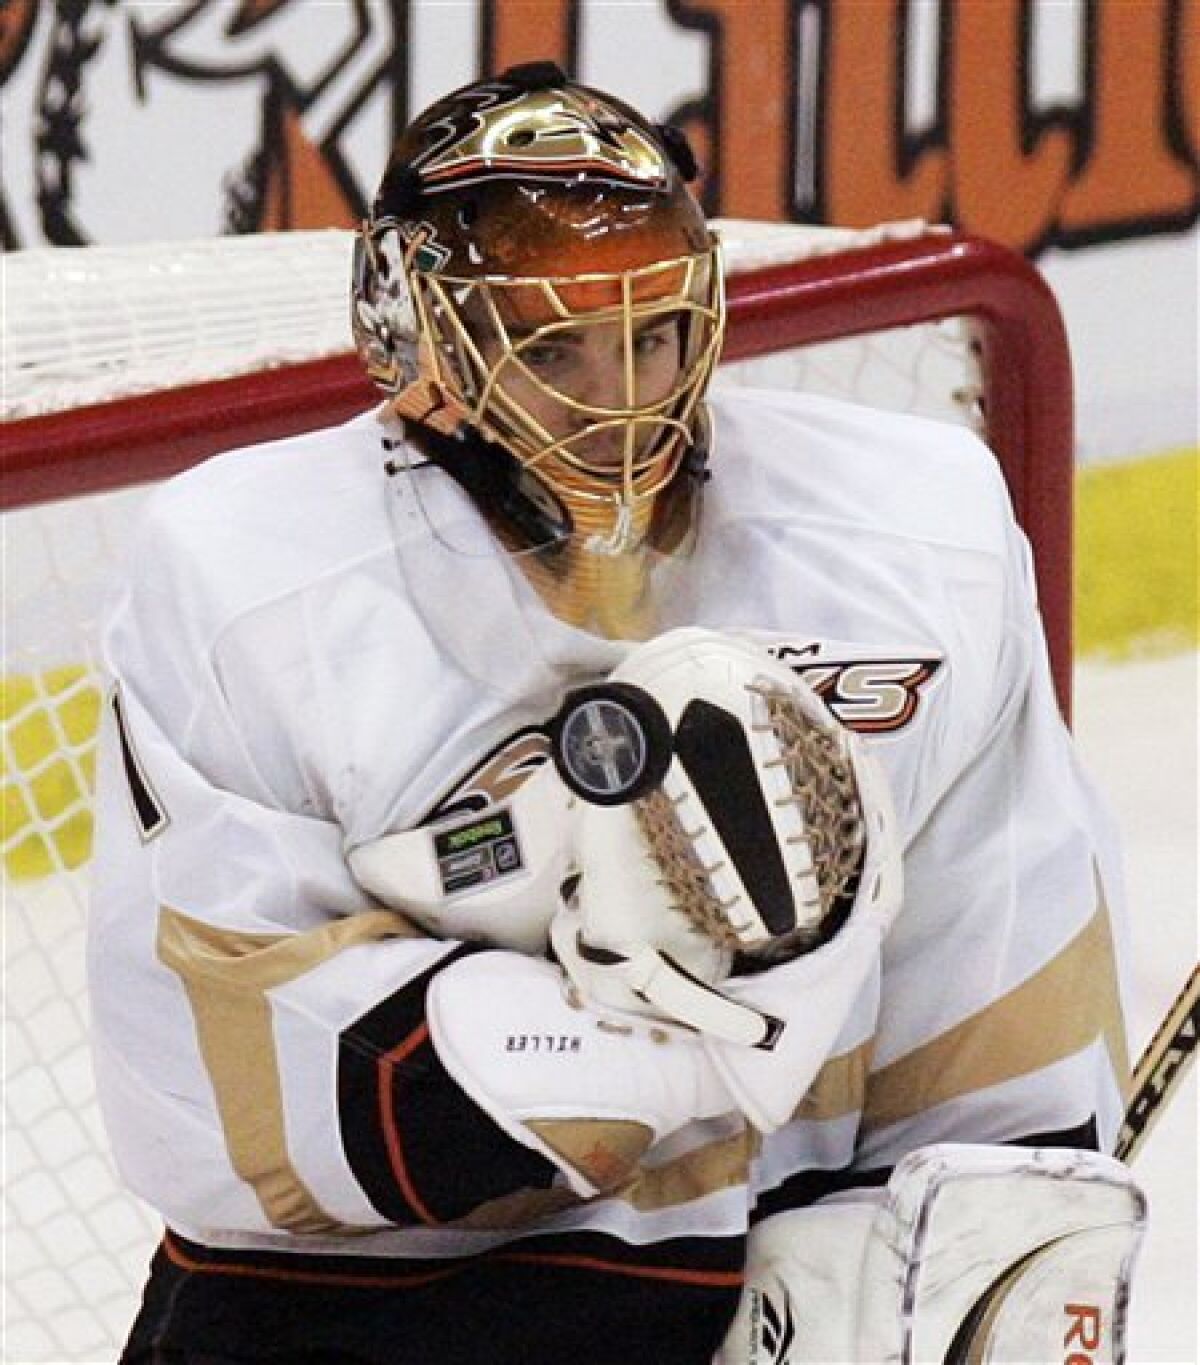 Anaheim Ducks goalie Jonas Hiller (1), of Switzerland, deflects a shot-on-goal during the first period of Game 2 of a second-round NHL hockey playoff series, Sunday, May 3, 2009, in Detroit. (AP Photo/Carlos Osorio)